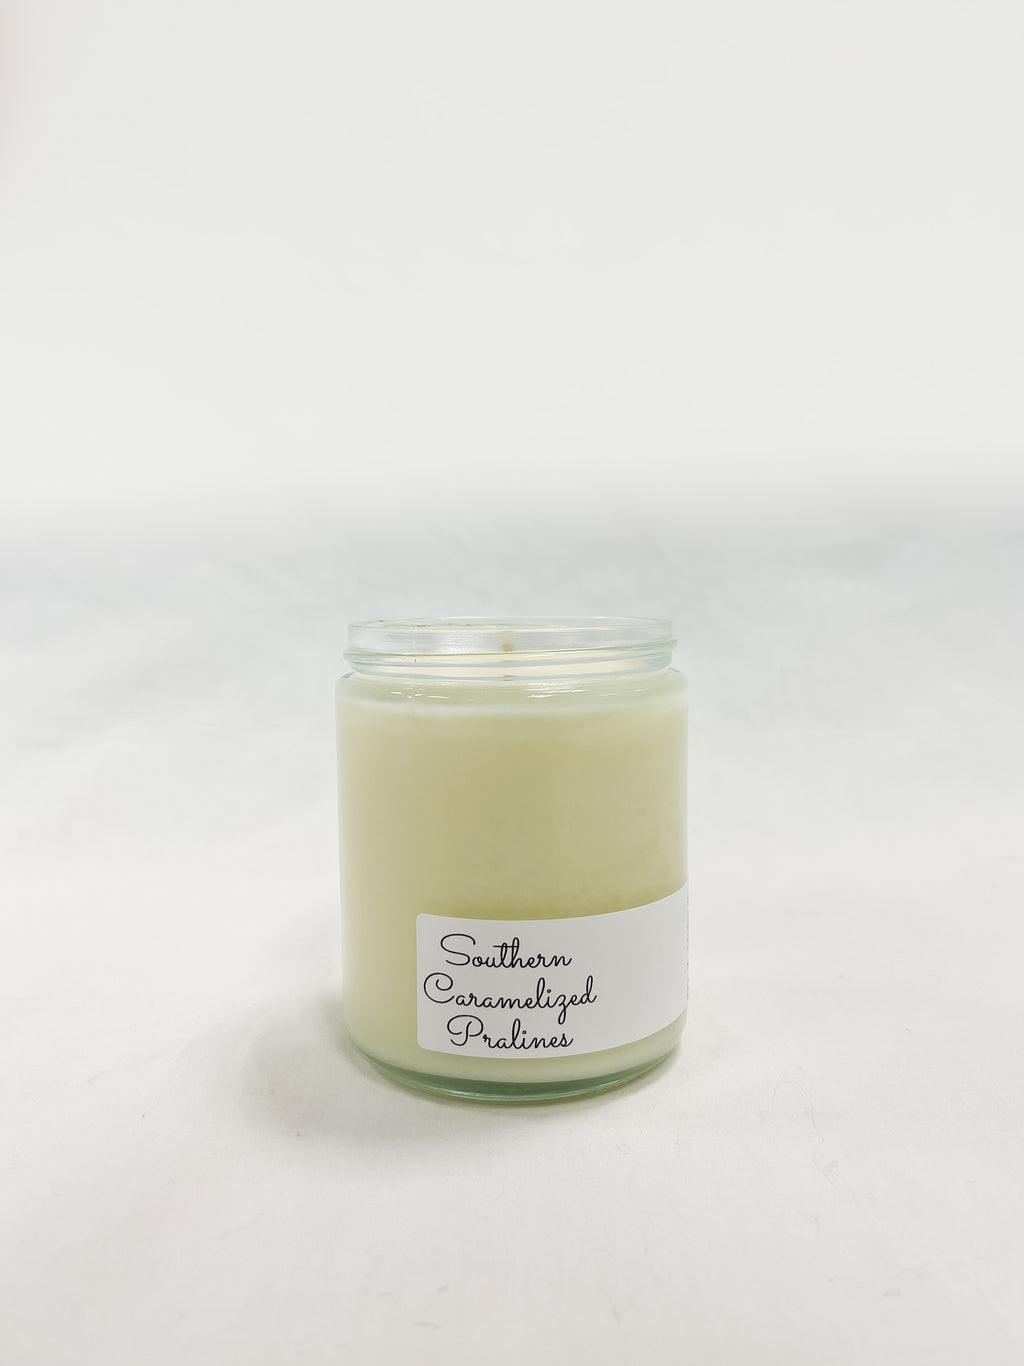 Southern Caramelized Pralines Soy Candle